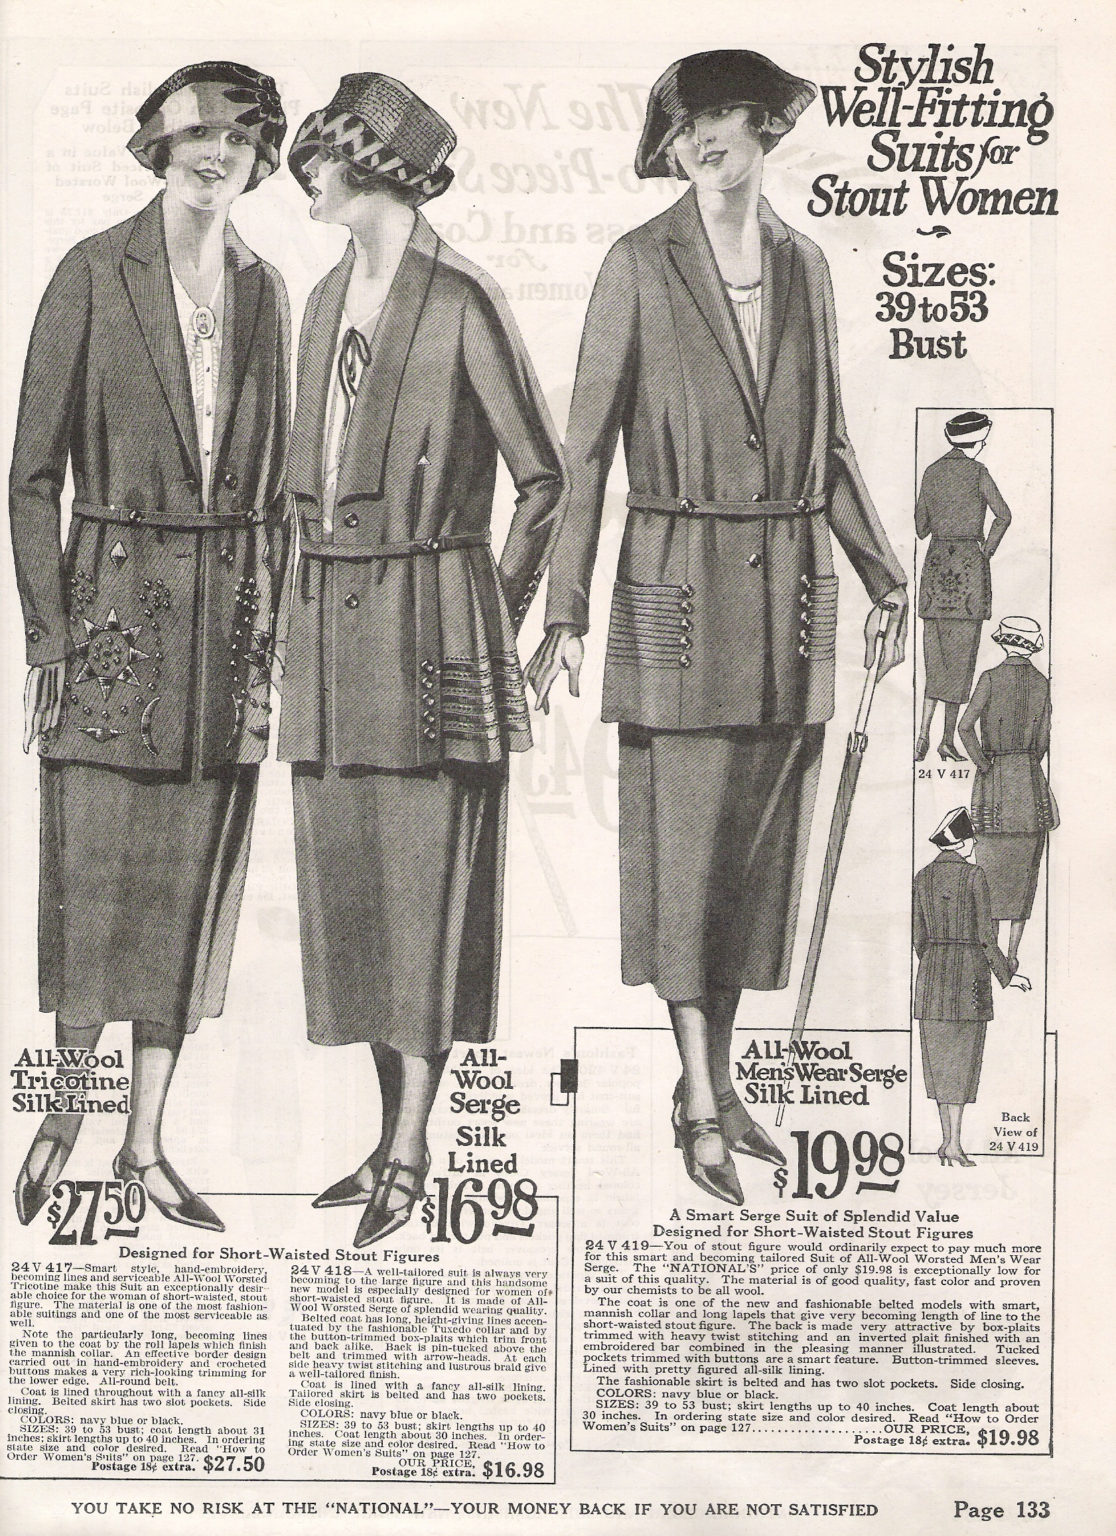 1920s Women's Suits for Travel, Work, & Leisure